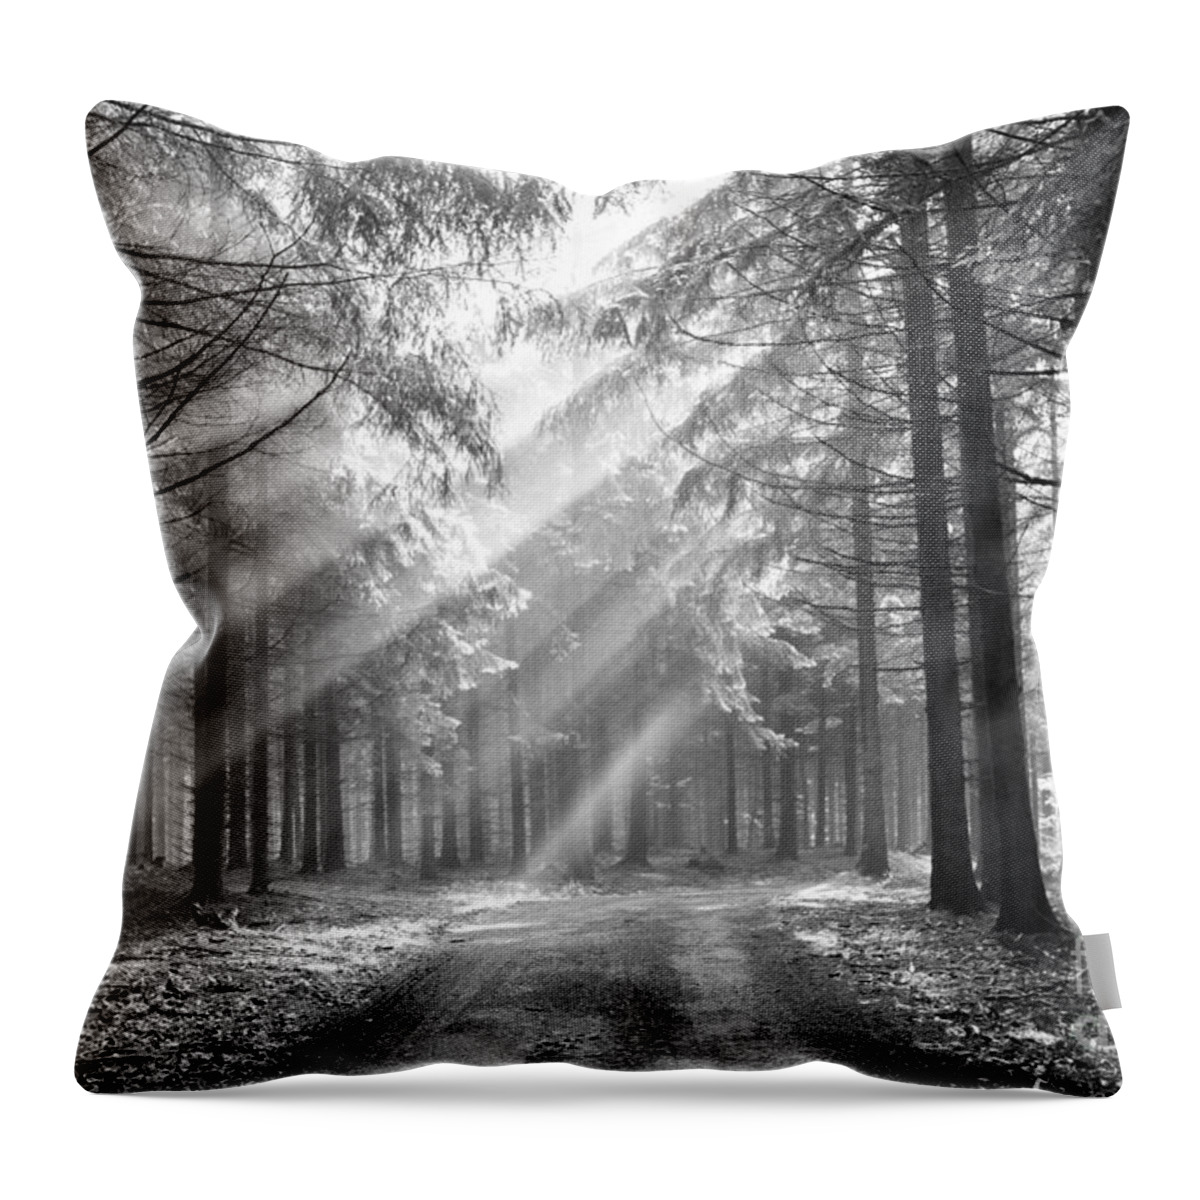 Black And White Throw Pillow featuring the photograph Conifer Forest In Fog by Michal Boubin